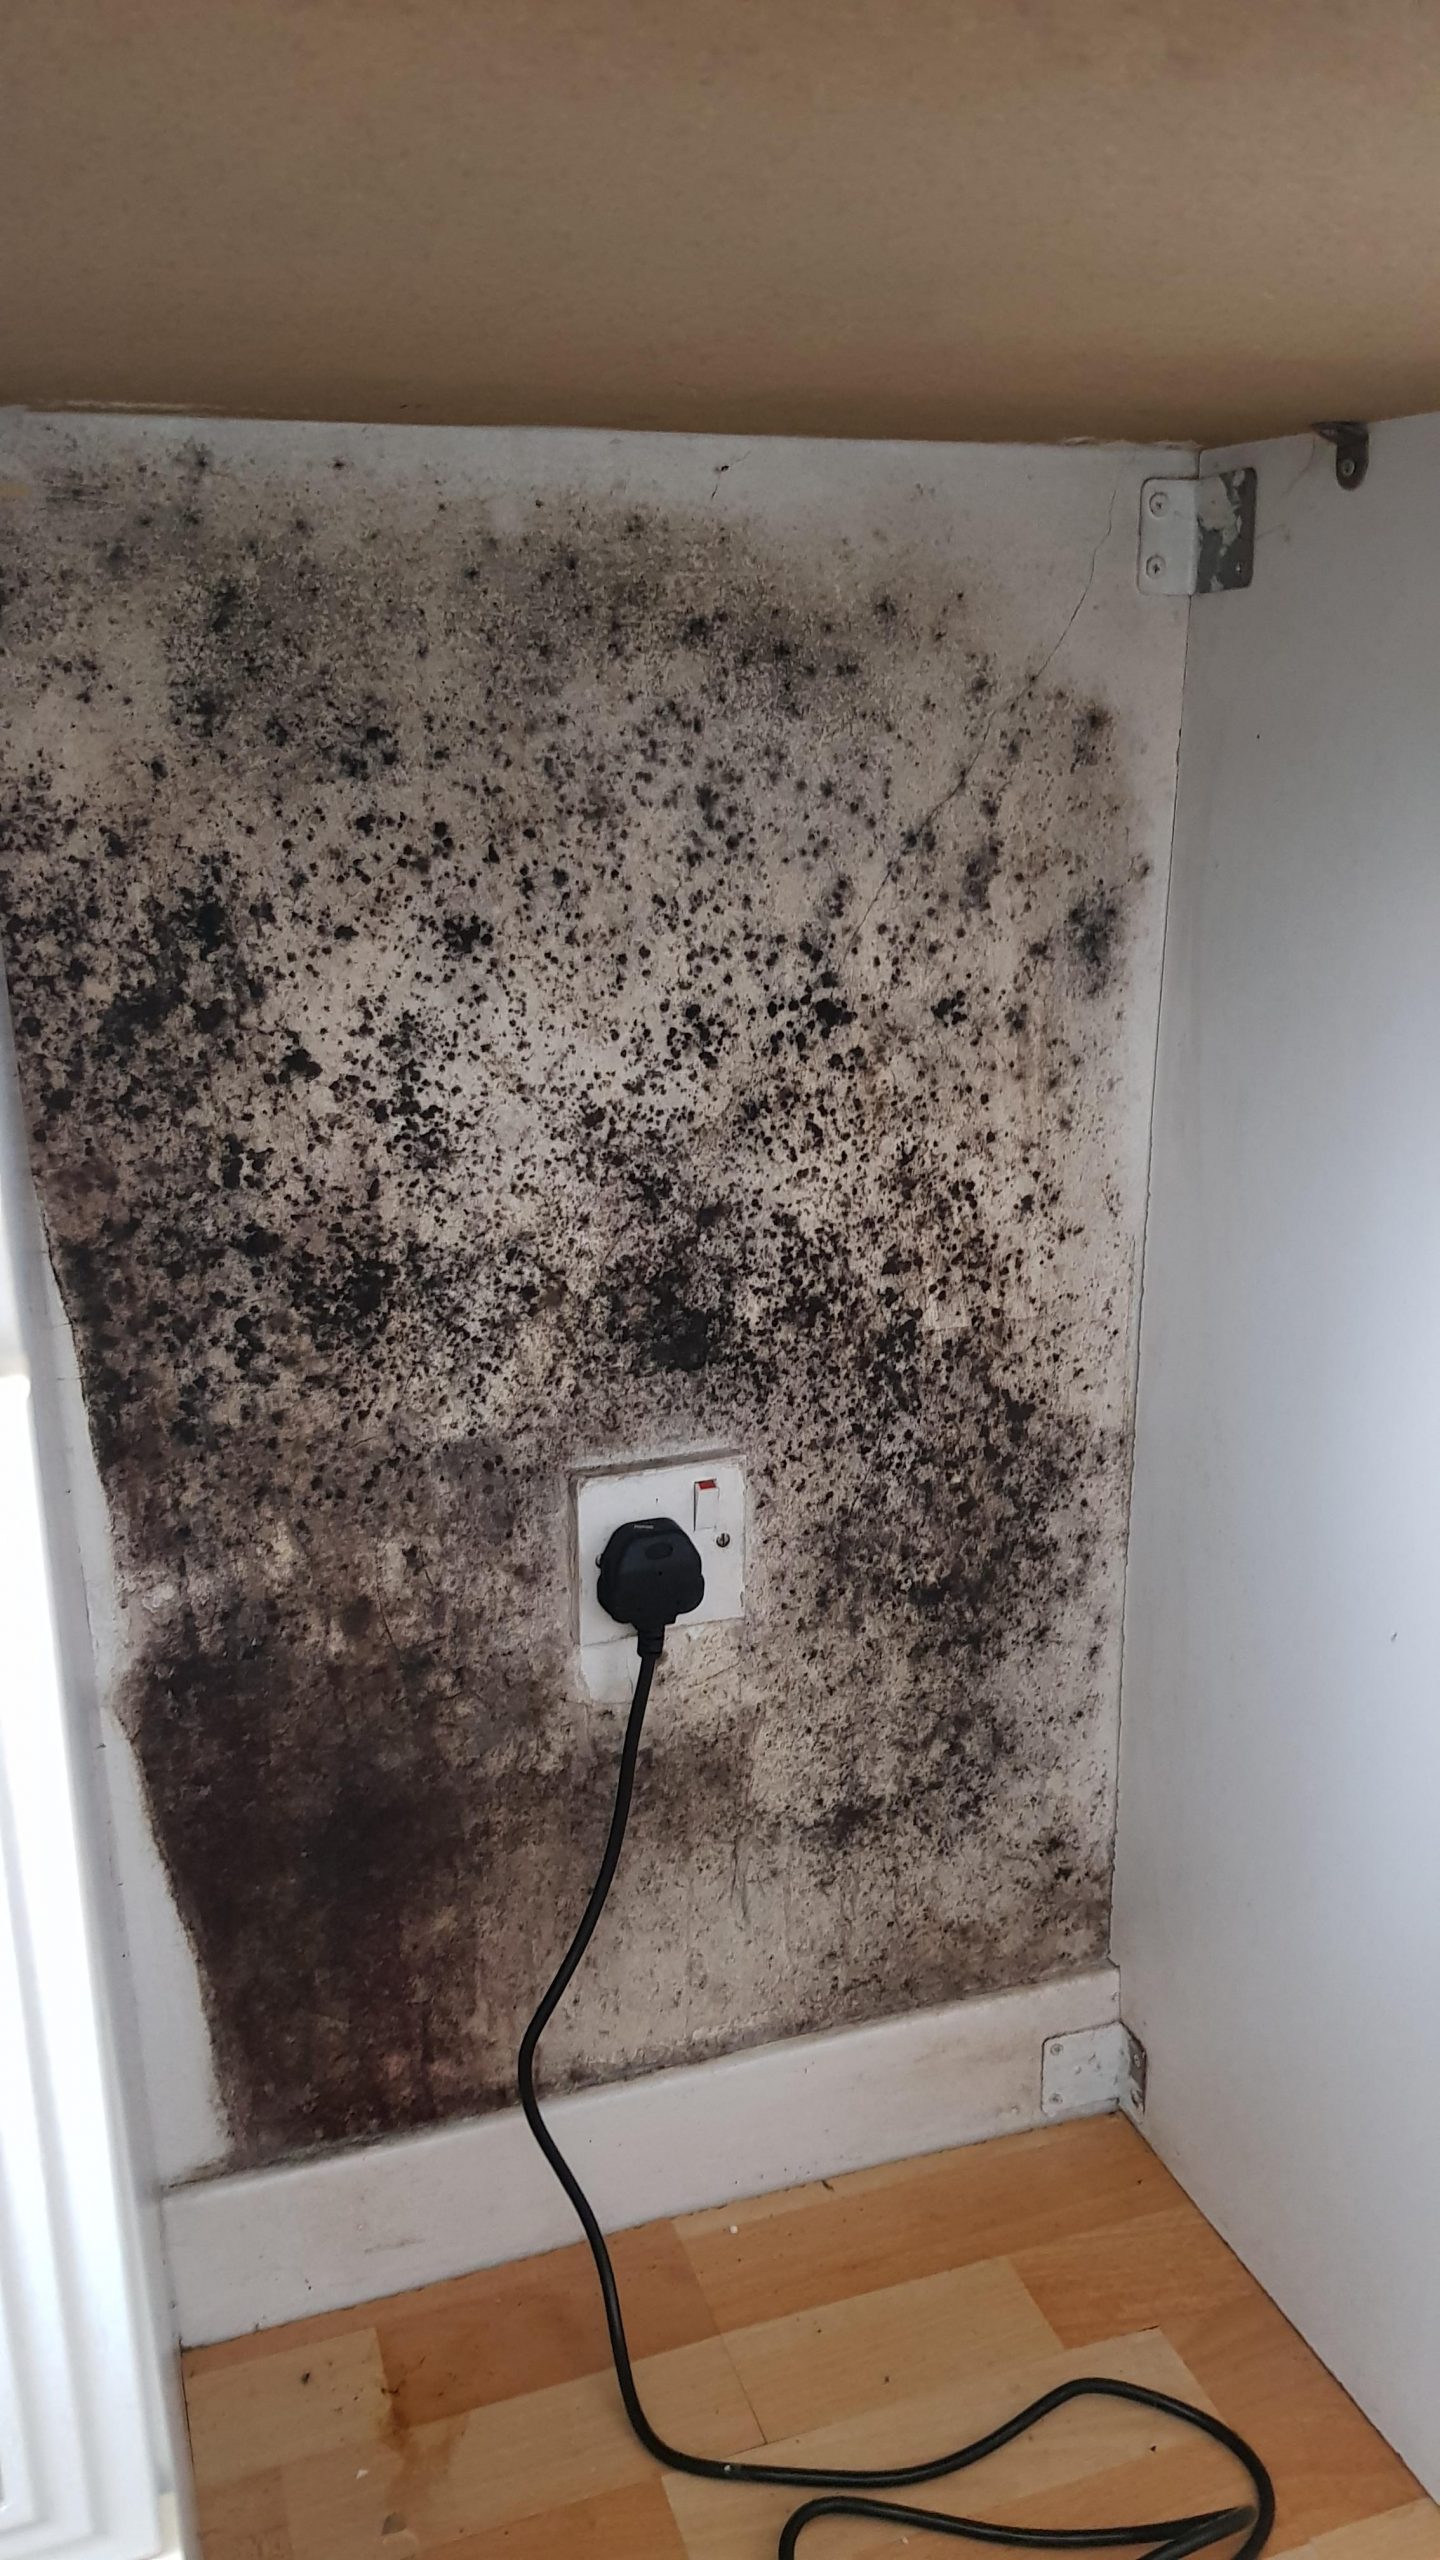 How long does this take to happen? Just moved in 16 days ago. : Mold